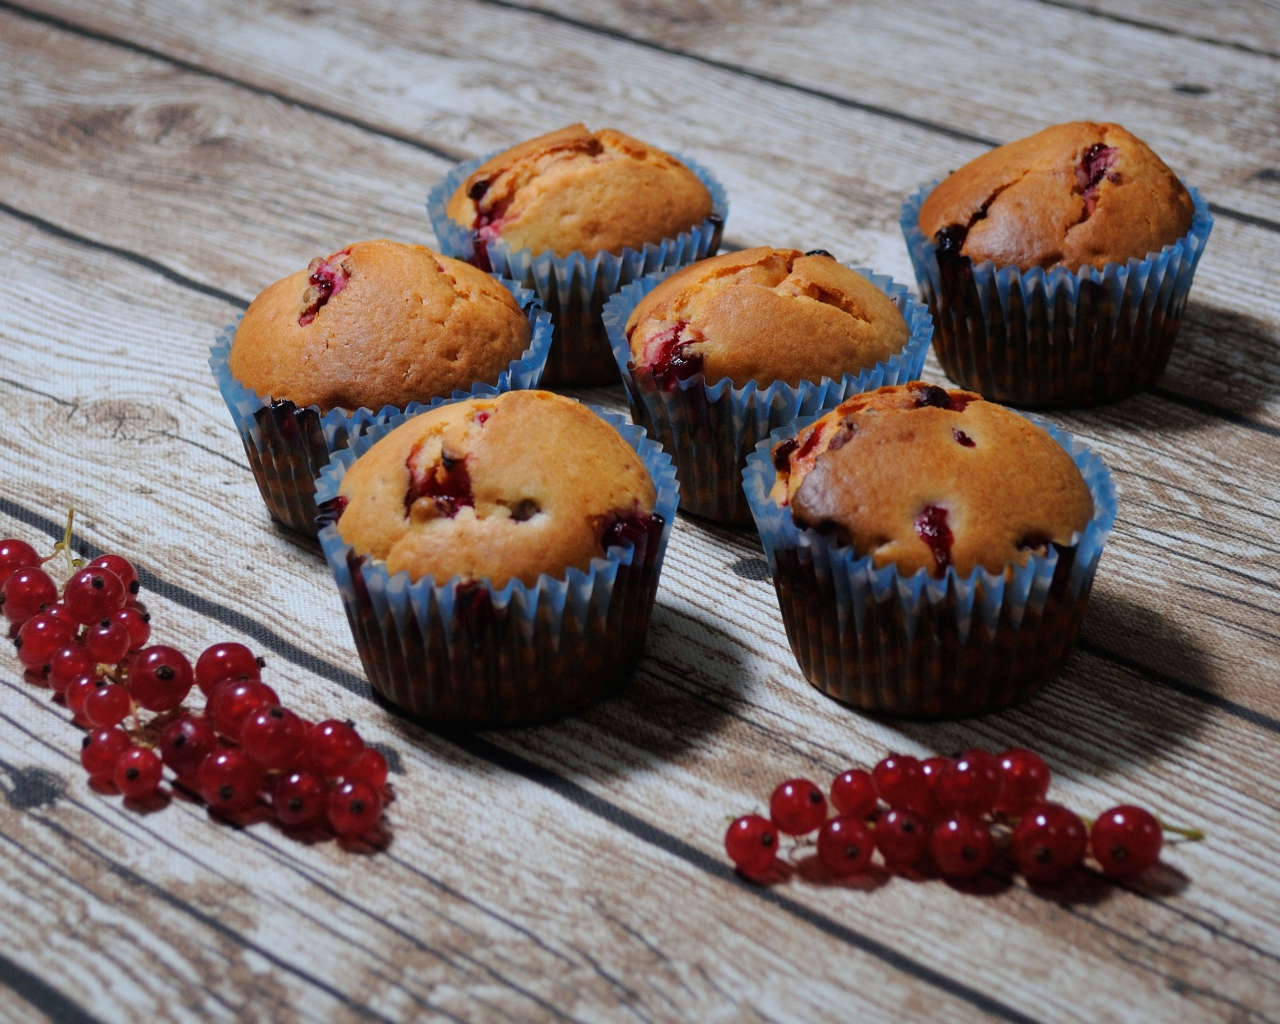 Fresh cupcakes with red currants on a wooden table